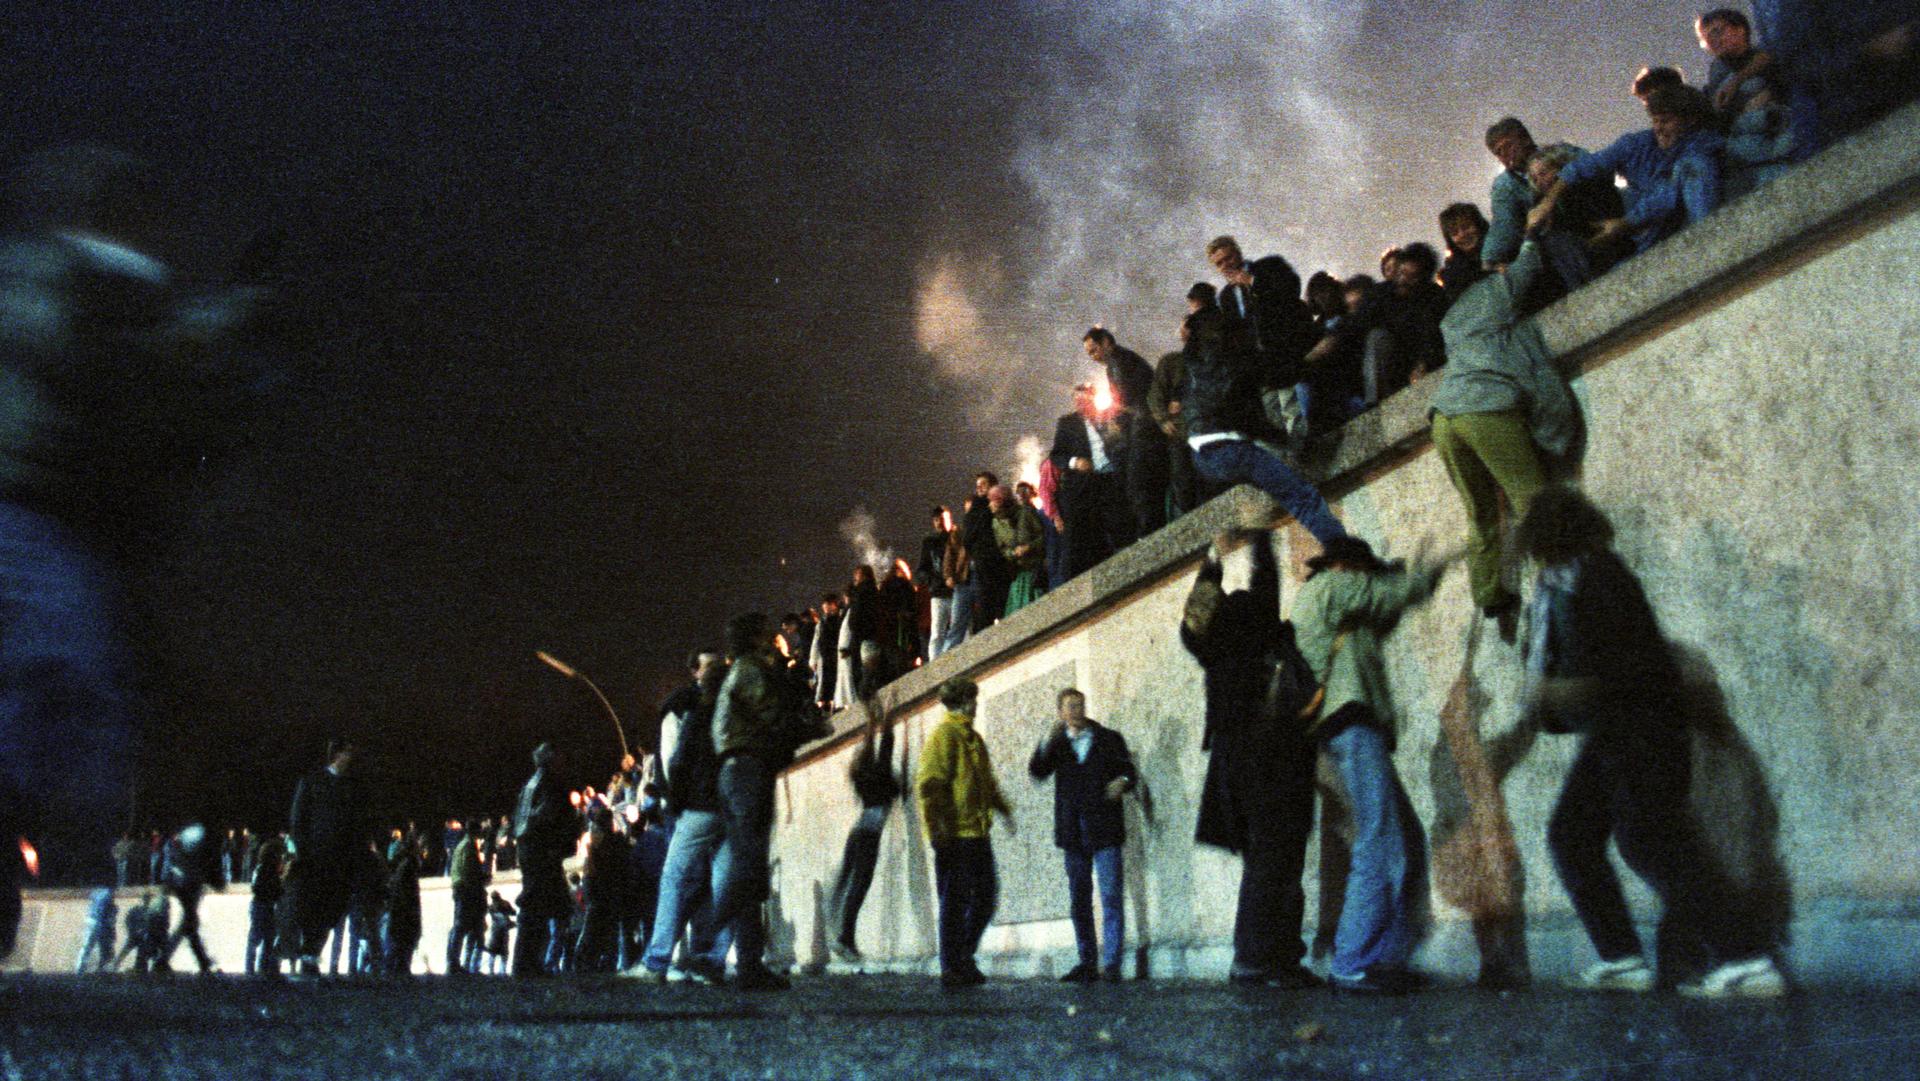 A large group of people are shown climbing on the Berlin Wall on the night it was opened.